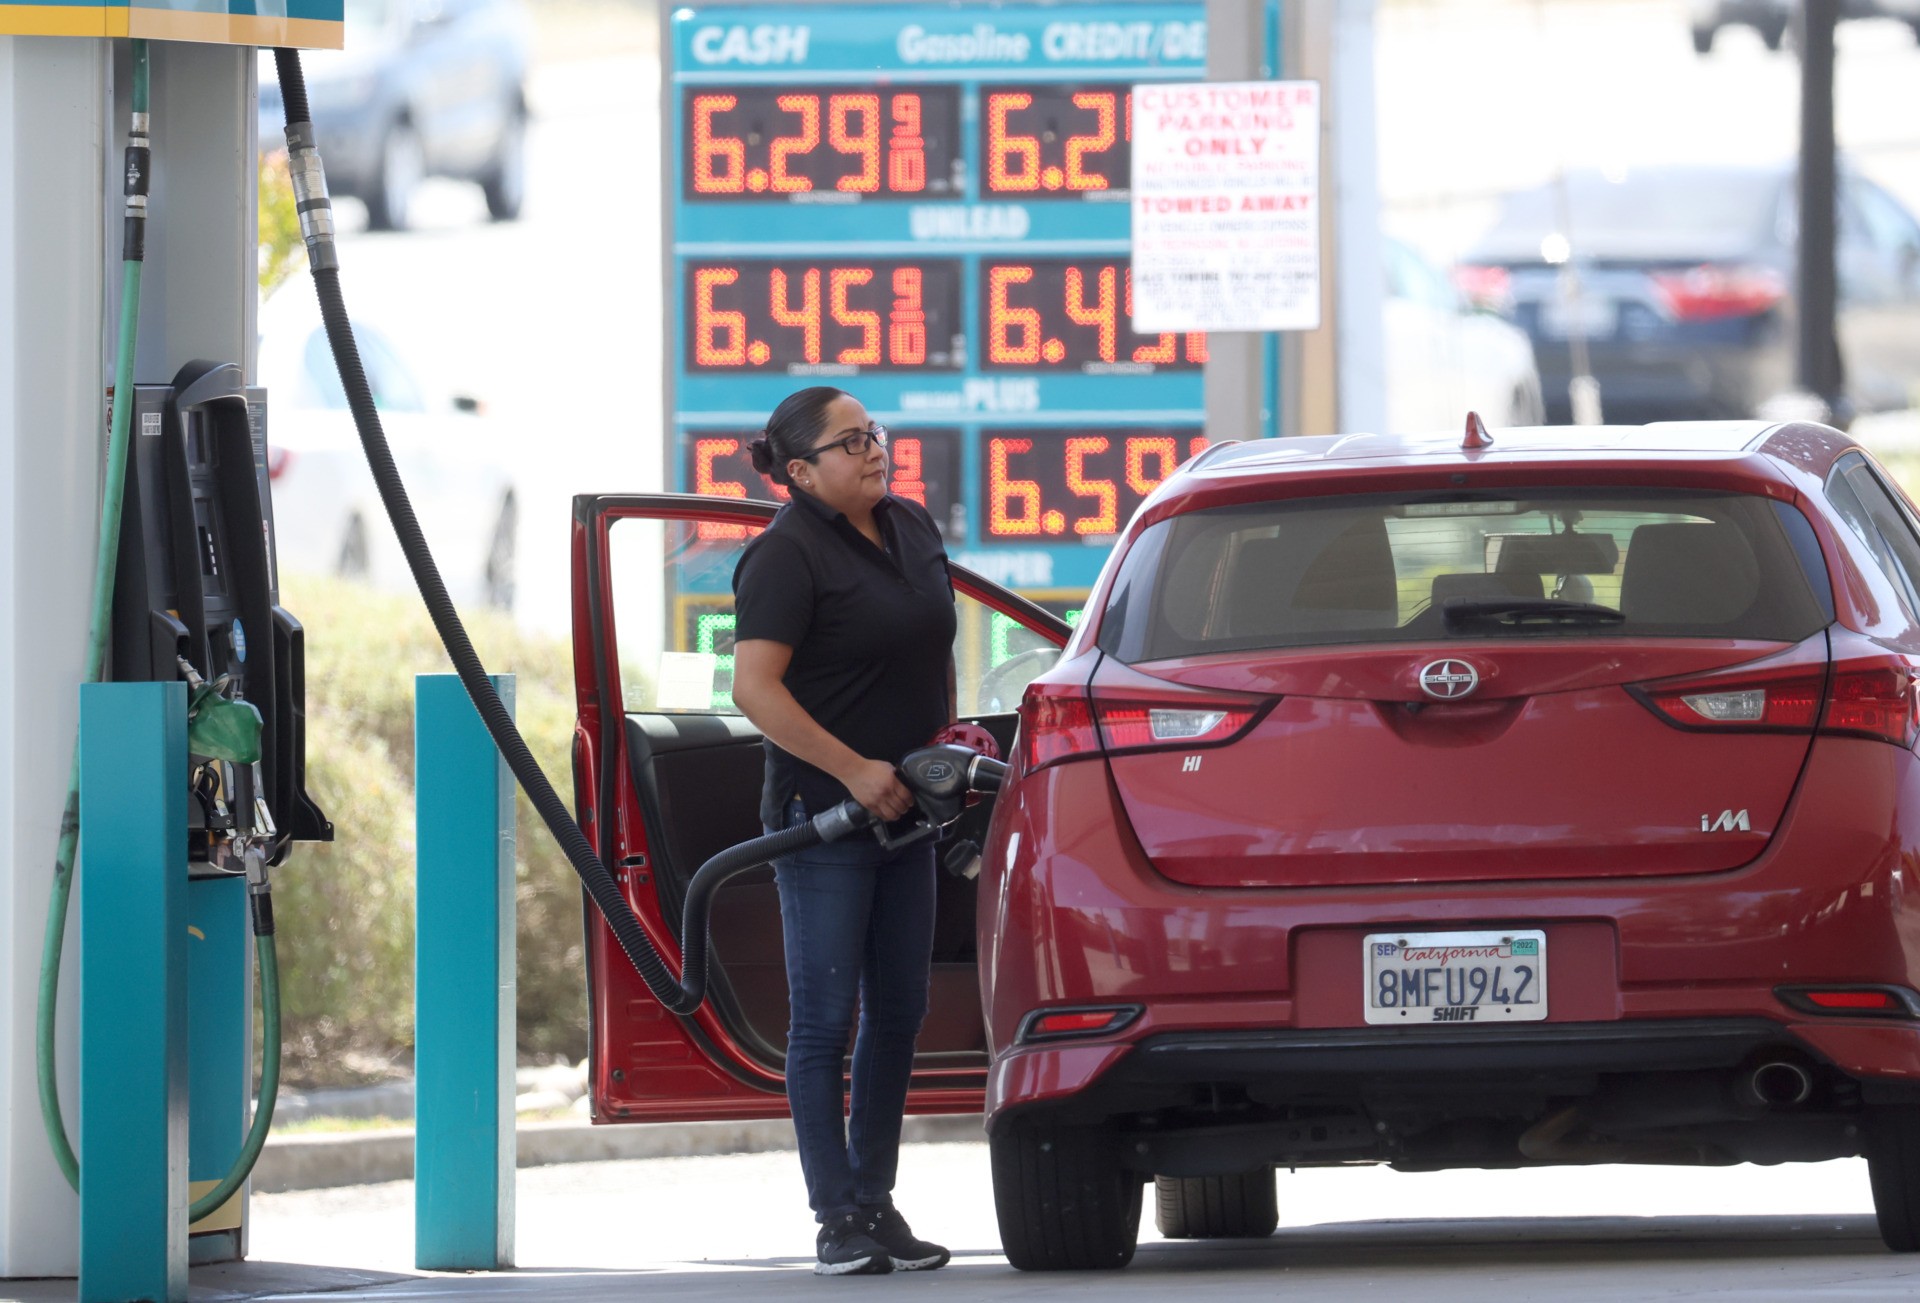 PETALUMA, CALIFORNIA - MAY 18: A customer pumps gas into their car at a gas station on May 18, 2022 in Petaluma, California. Gas prices in California have surpassed $6.00 per gallon for the first time ever. The average price per gallon of regular unleaded gasoline in California is at $6.05 and $6.29 in the San Francisco Bay Area. (Photo by Justin Sullivan/Getty Images)